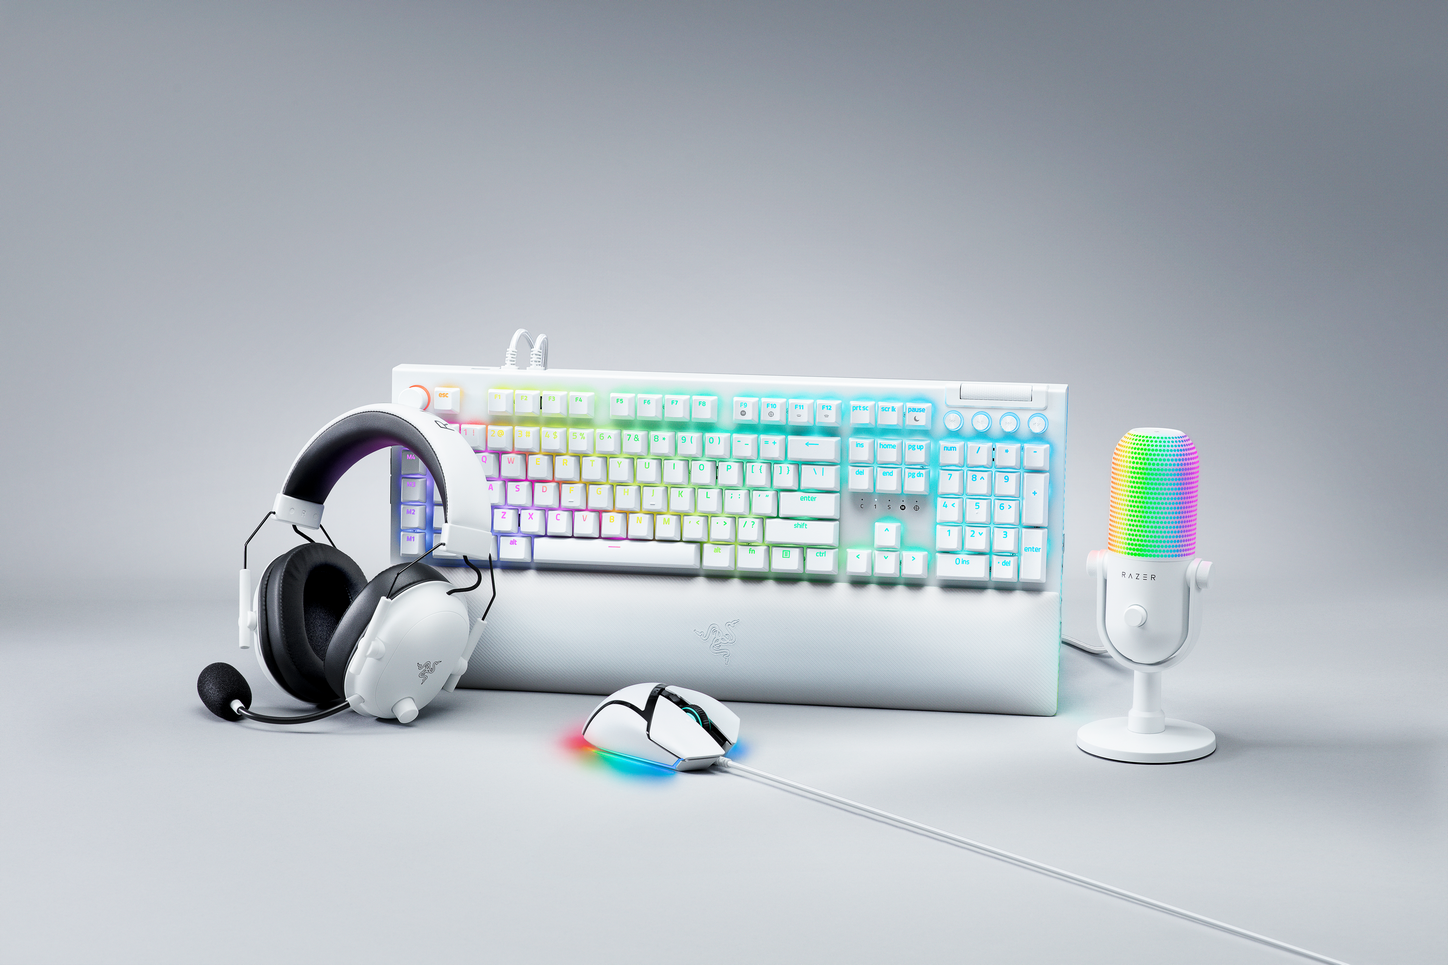 Razer Elevates Gaming Excellence With New White Edition Peripherals